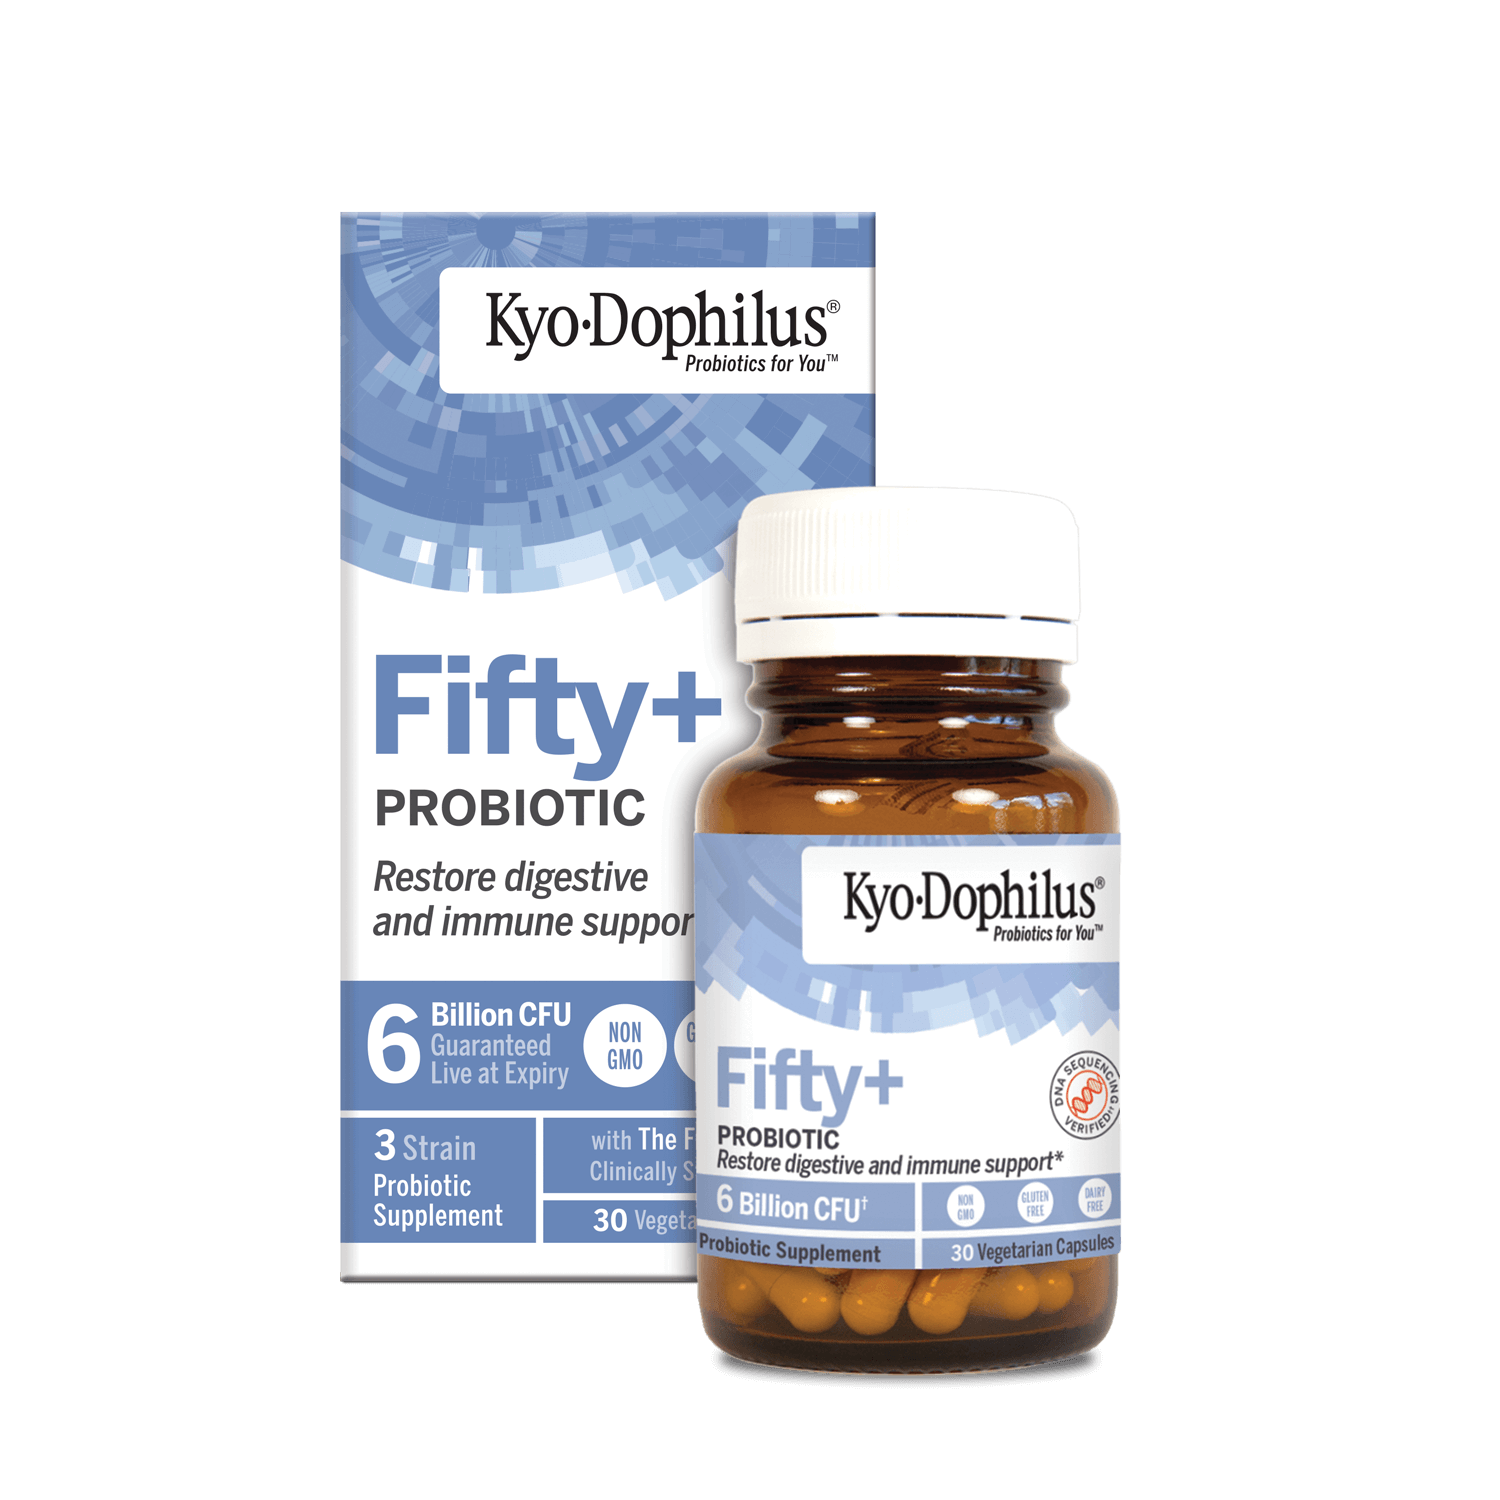  Fifty+ Probiotic